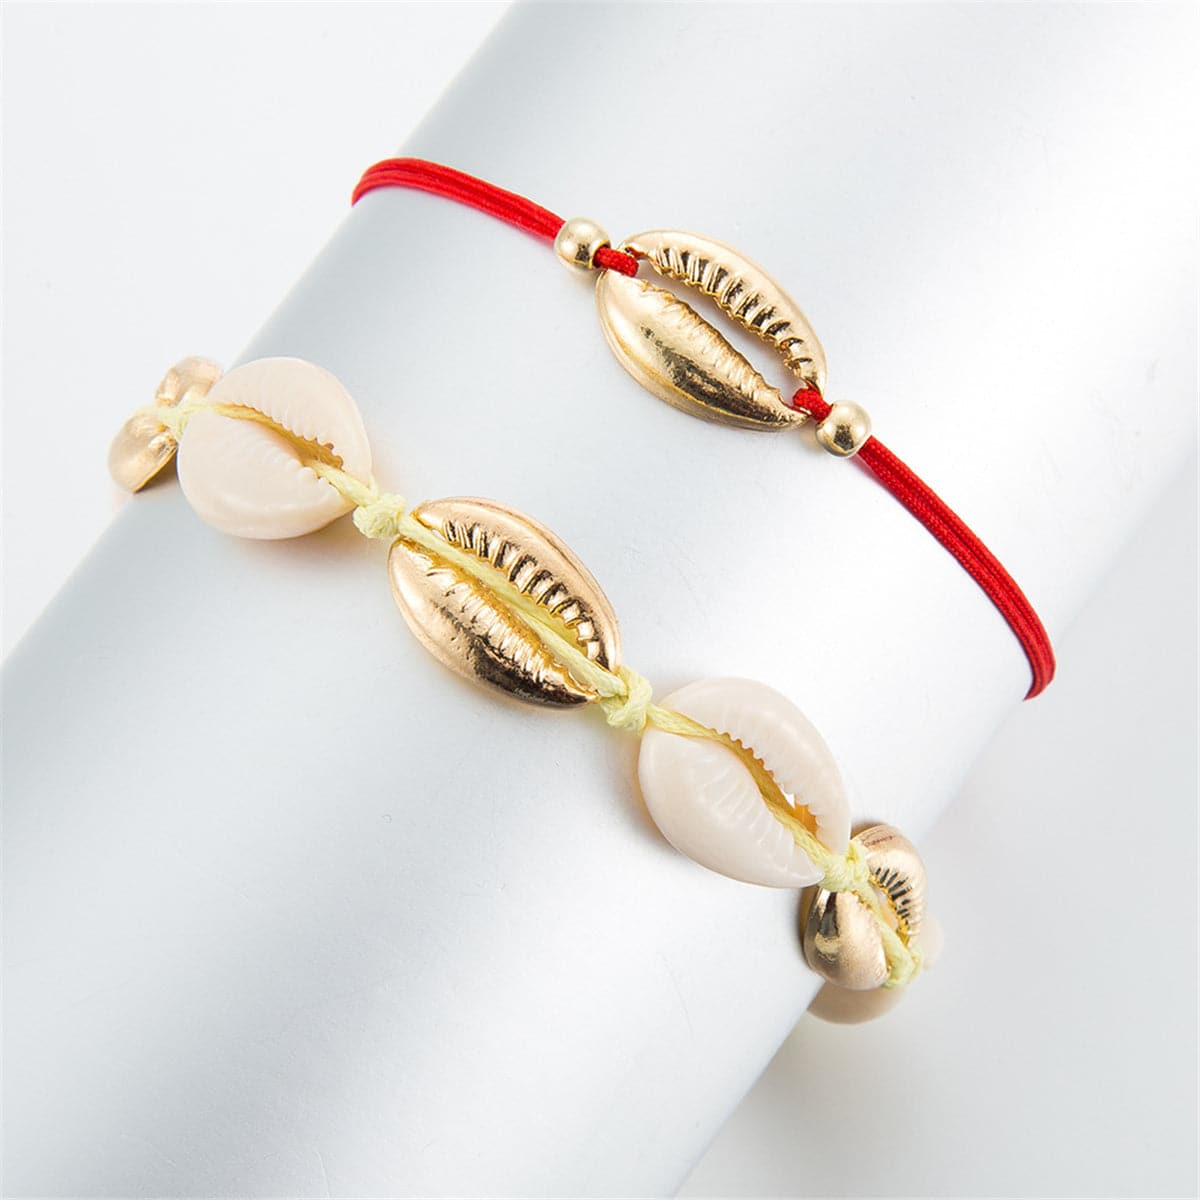 Red & 18K Gold-Plated Seashell Anklet Set